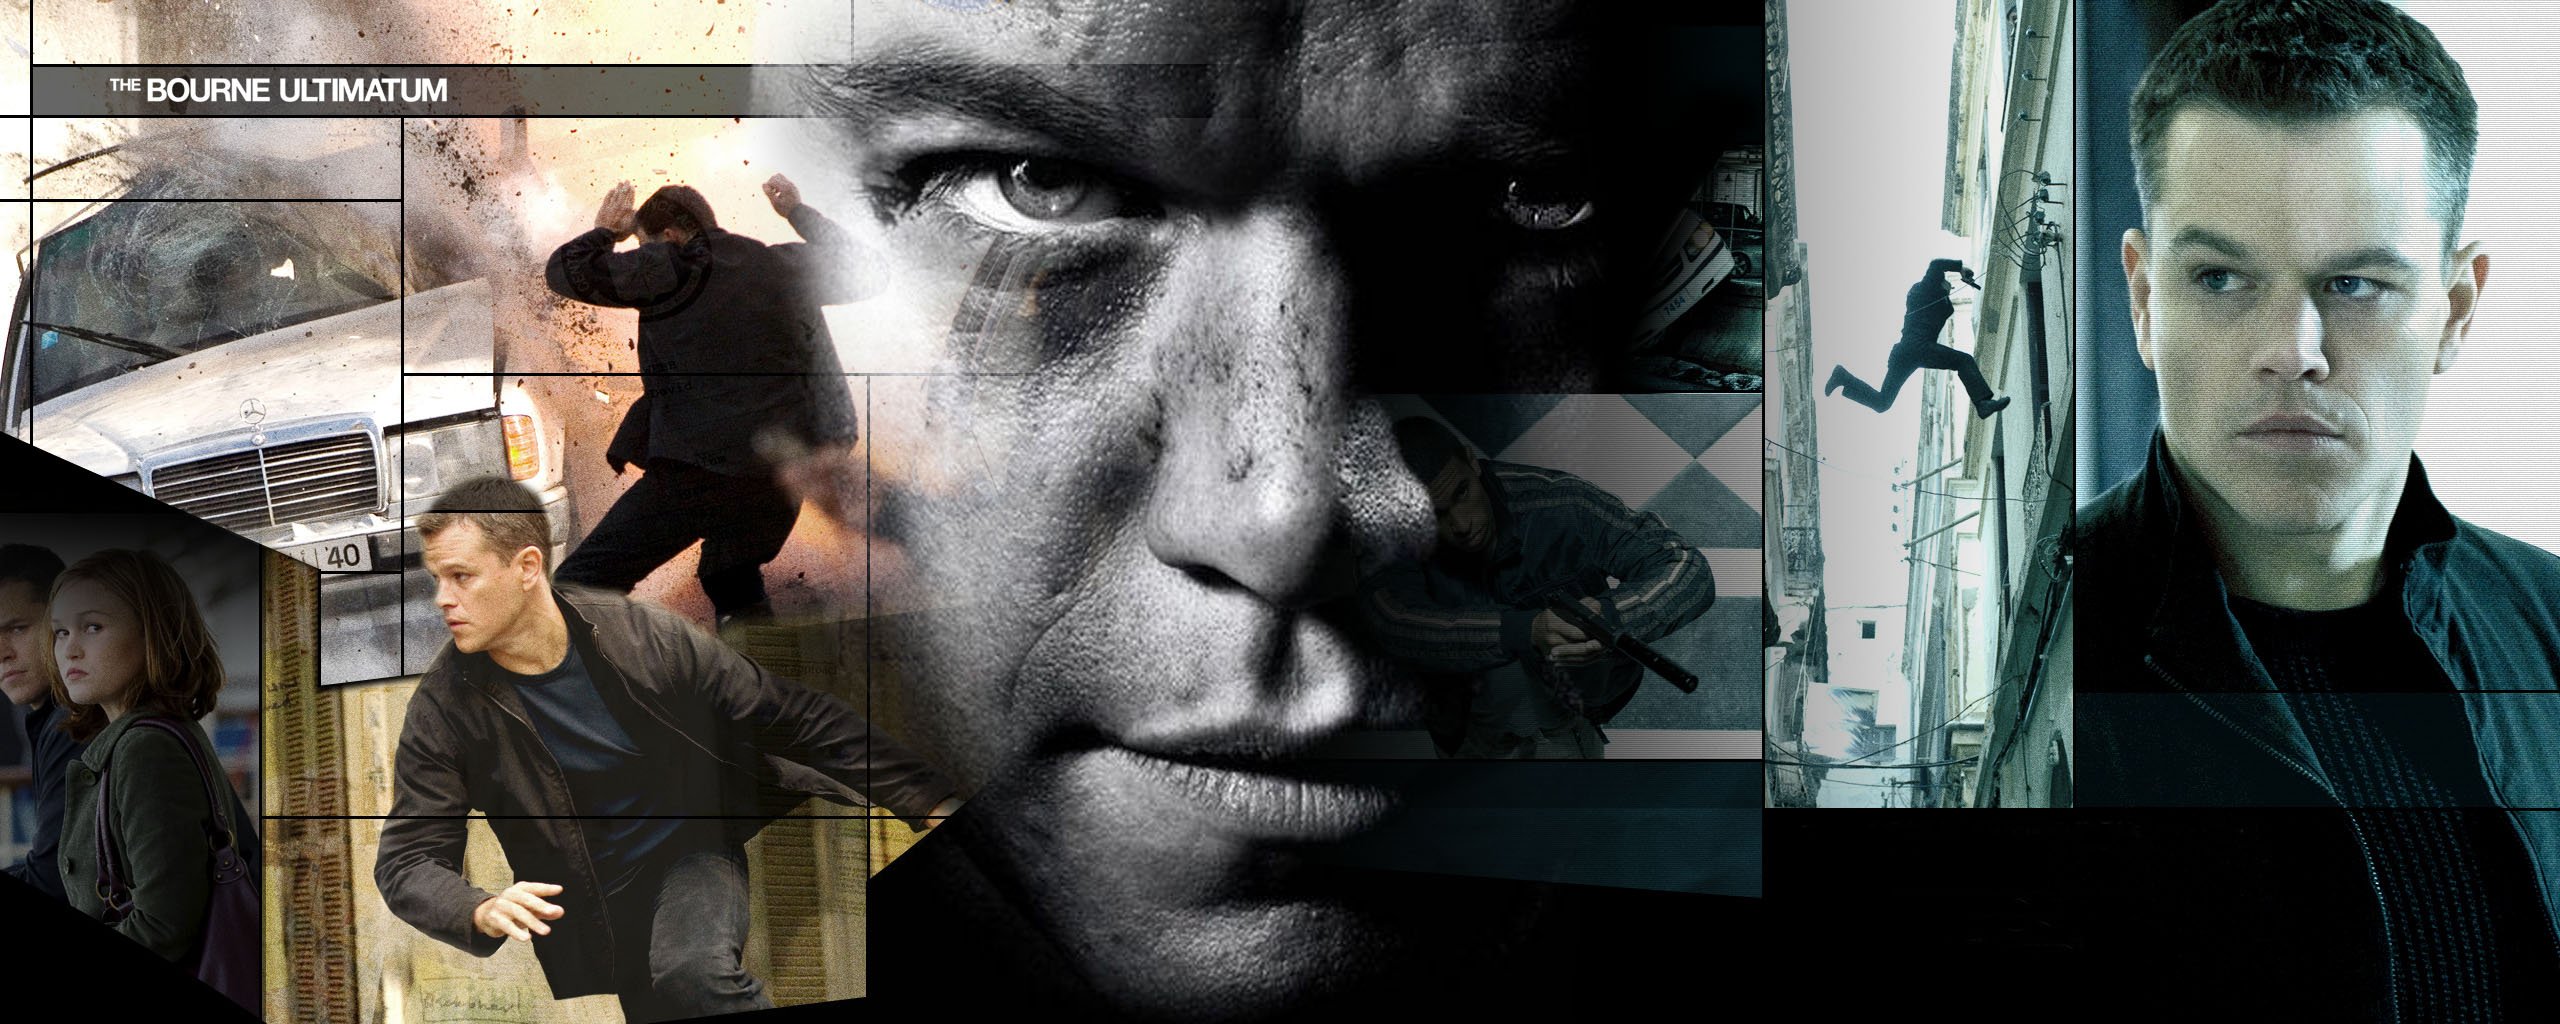 where can i watch jason bourne online for free